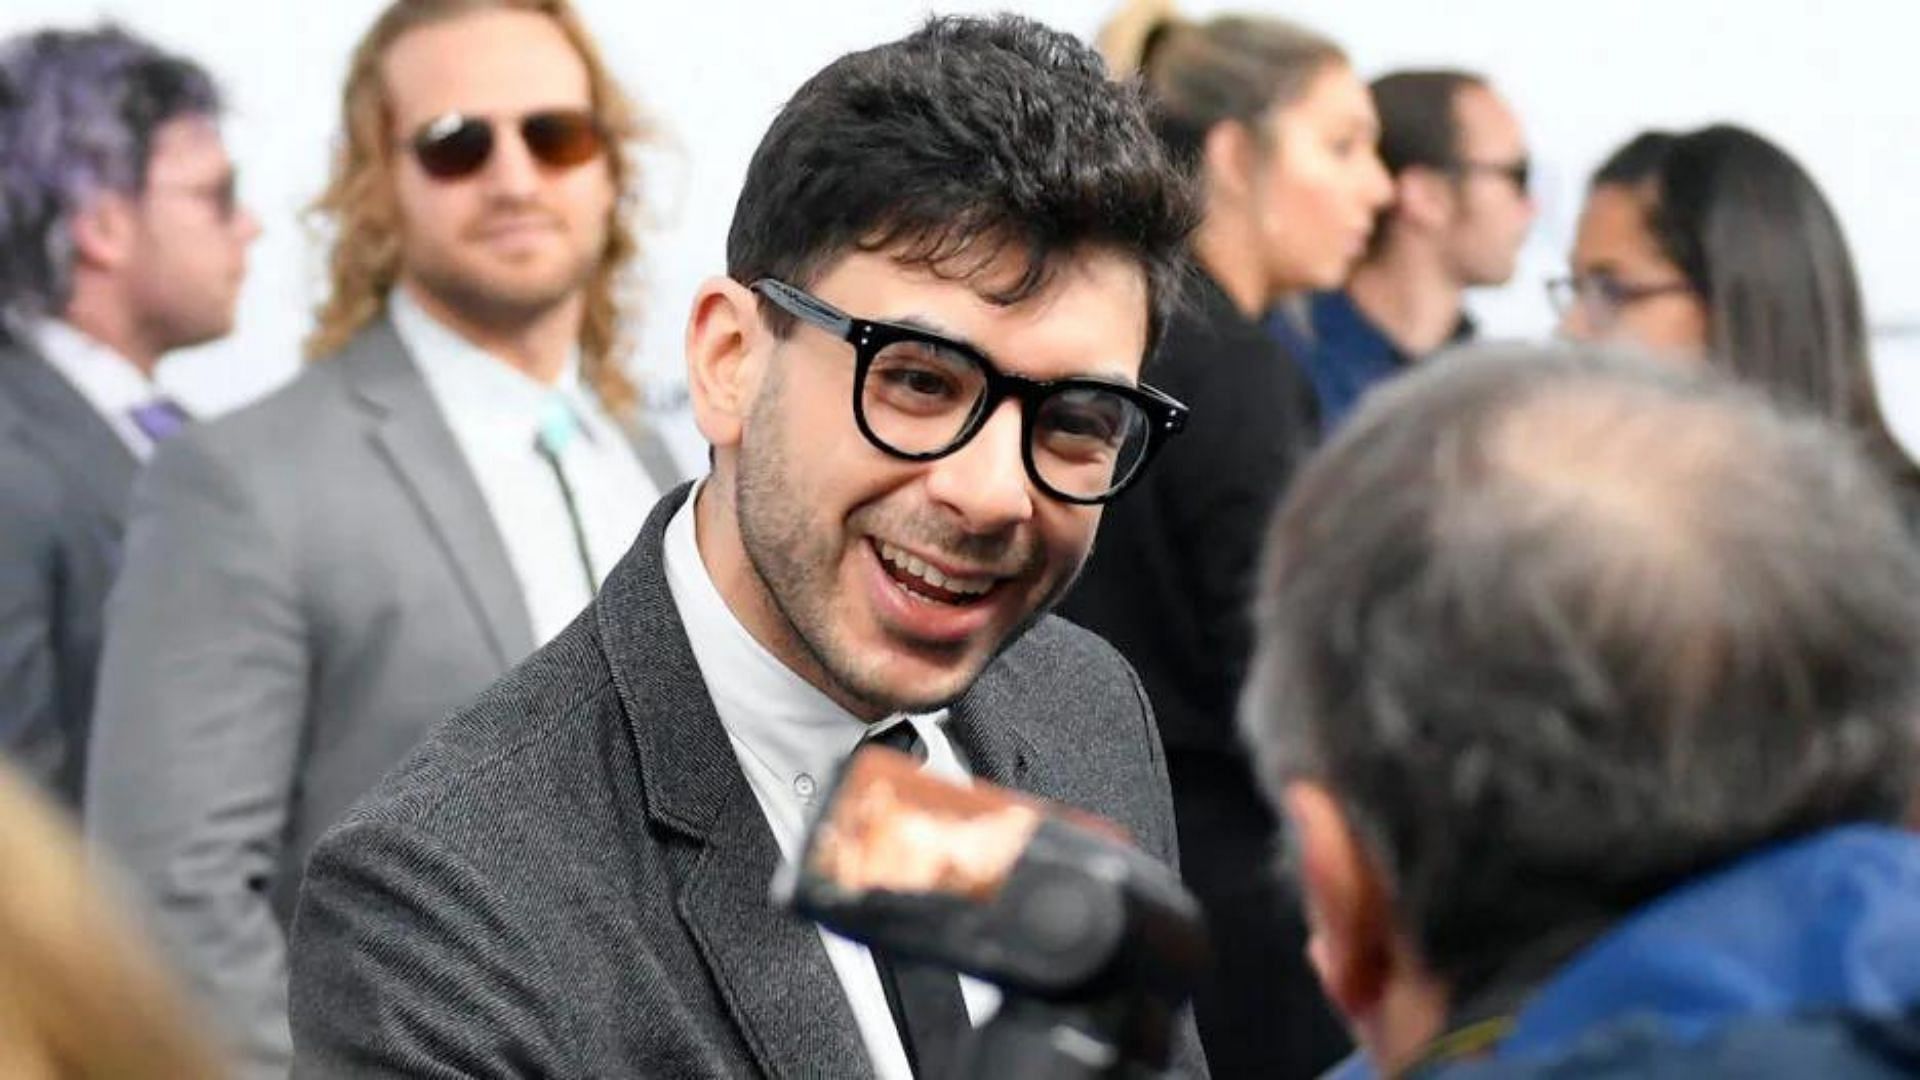 Tony Khan at a red carpet event in 2019